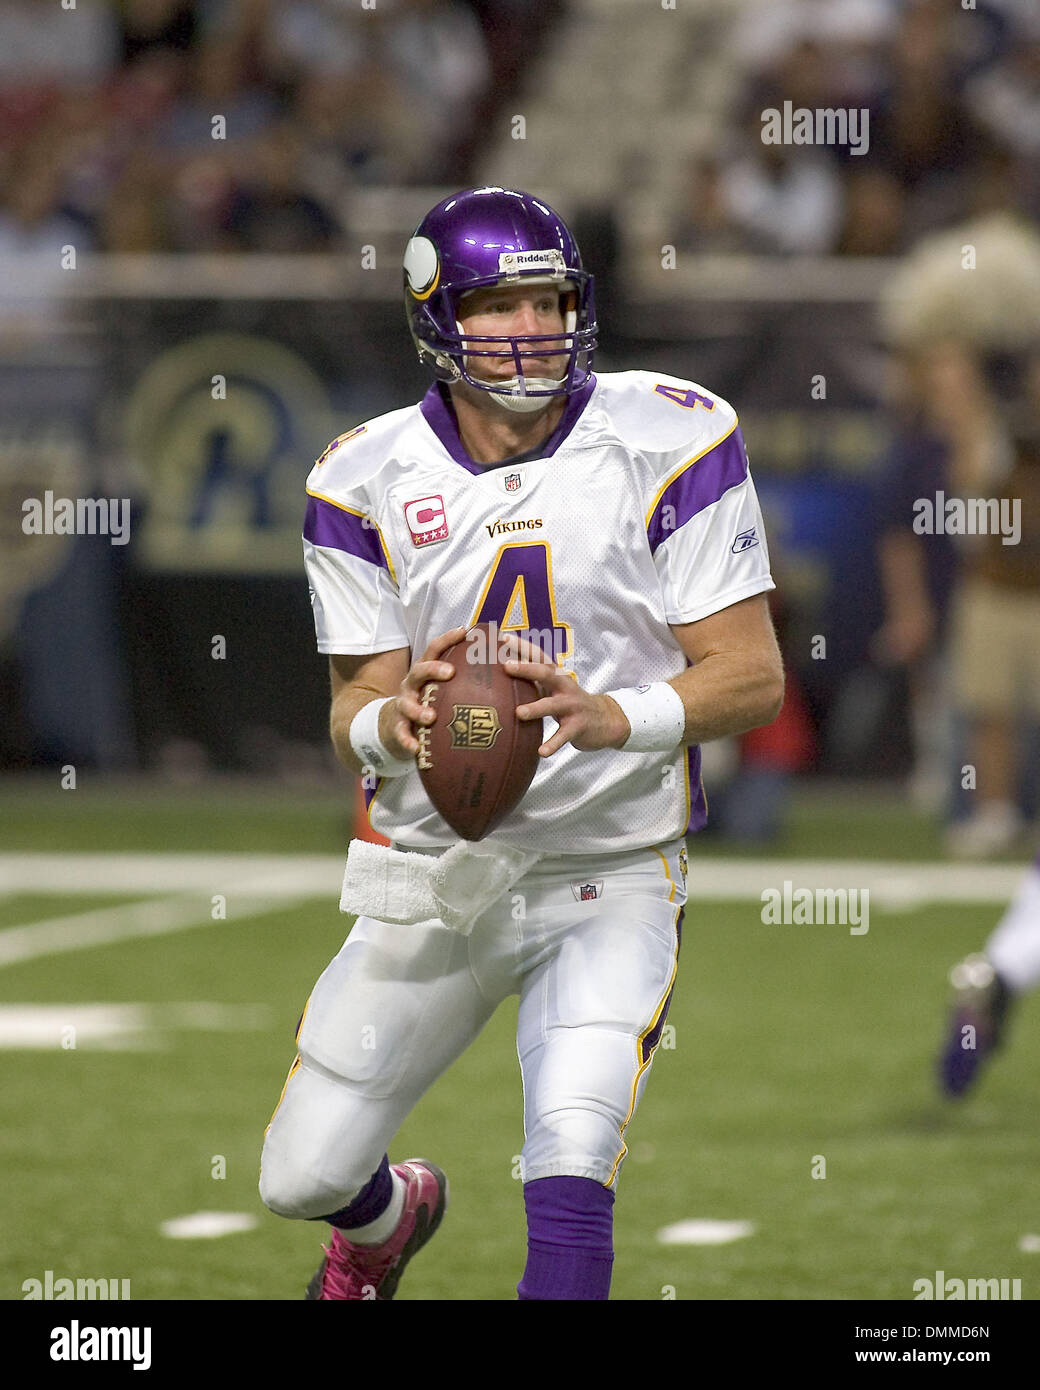 Oct 11, 2009 - St Louis, Missouri, USA - NFL Football - Vikings quarterback BRETT FAVRE (4) in action in the game between the St Louis Rams and the Minnesota Vikings at the Edward Jones Dome.  The Vikings defeated the Rams 38 to 10.   (Credit Image: © Mike Granse/ZUMA Press) Stock Photo